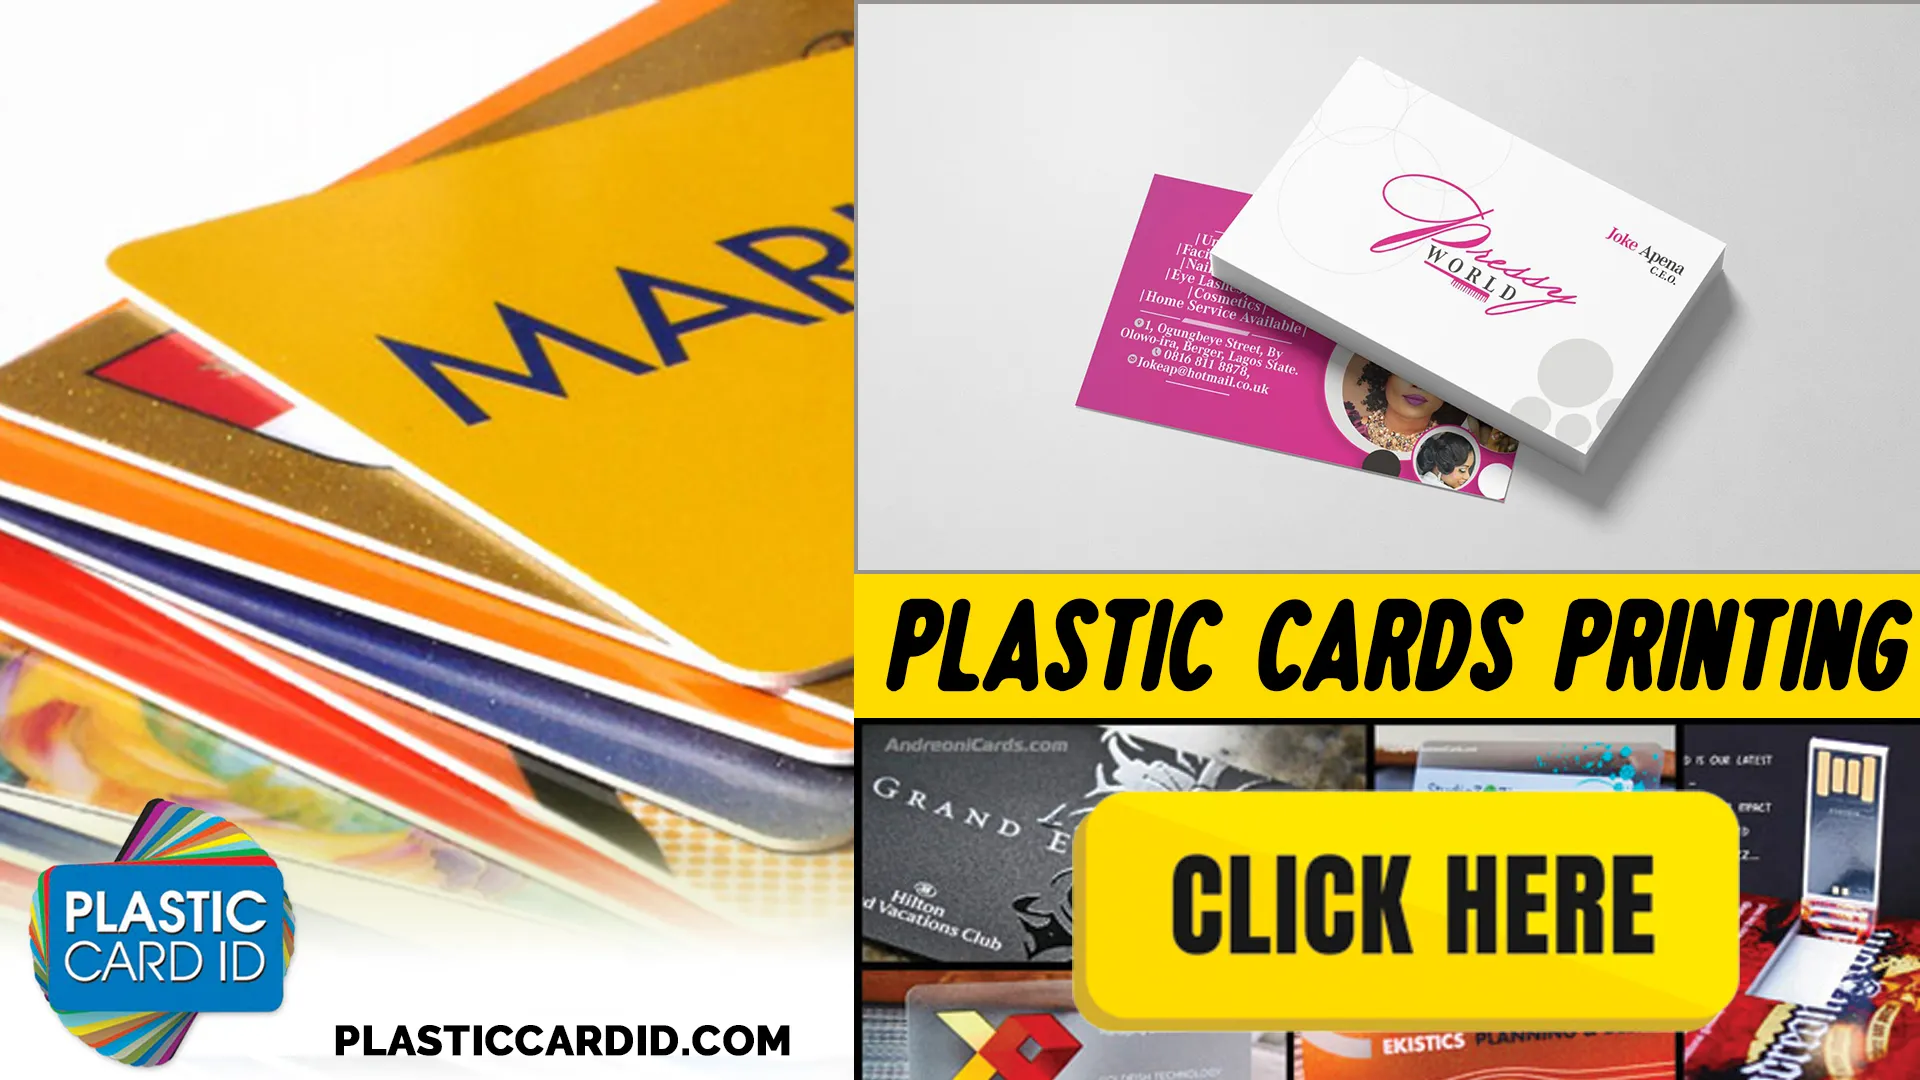 The Perks of Partnering with Plastic Card ID
